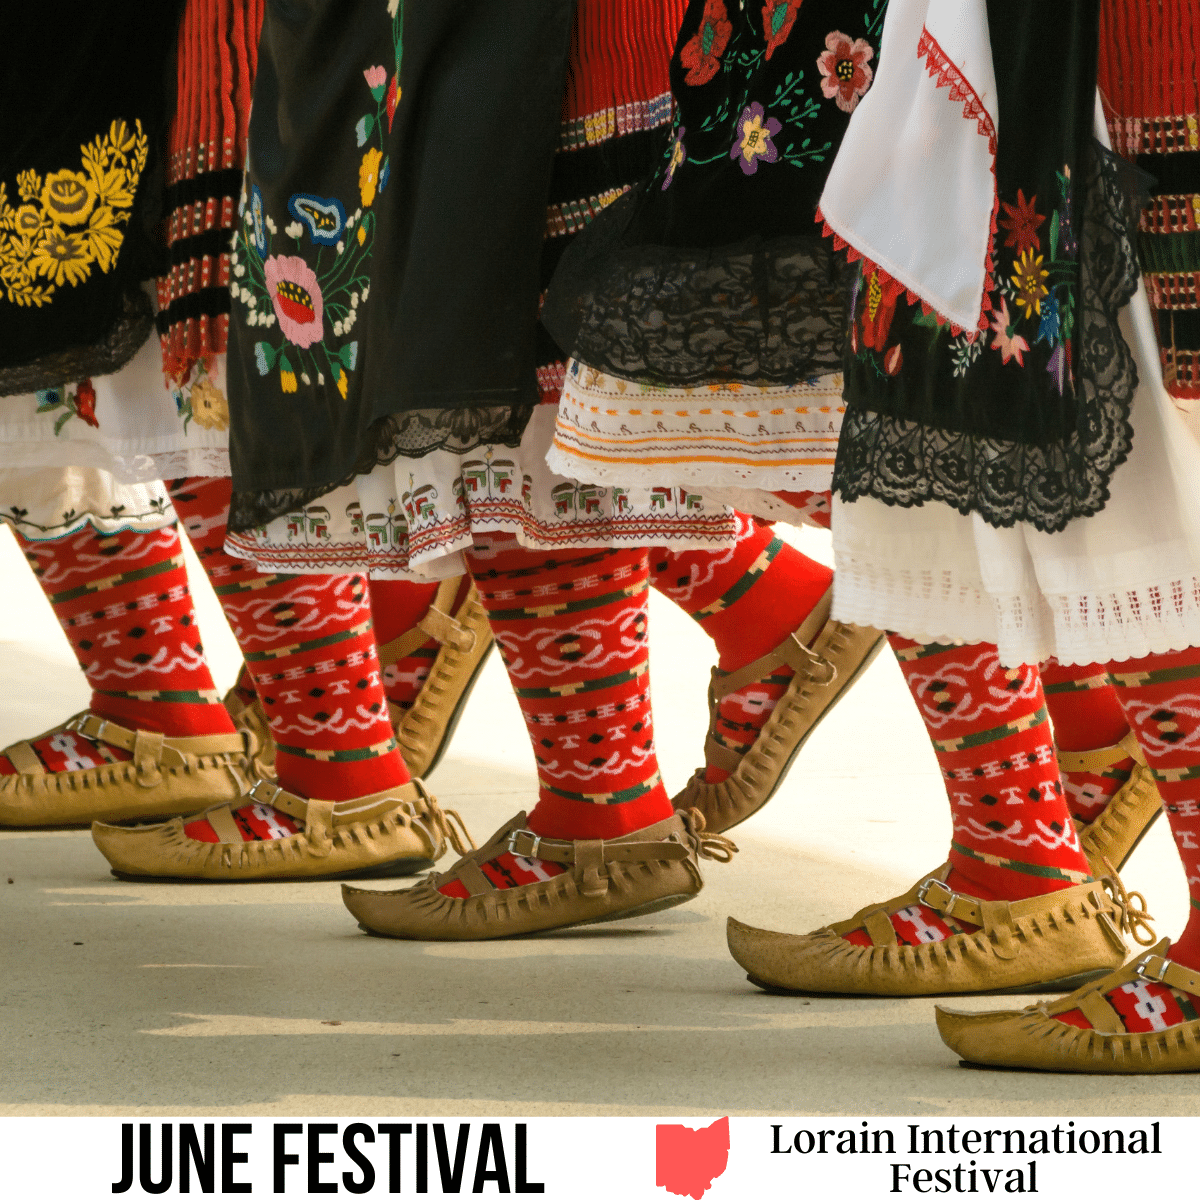 A square image of a photo of several people in tradition costume, dancing. A white strip across the bottom has text June Festival Lorain International Festival.